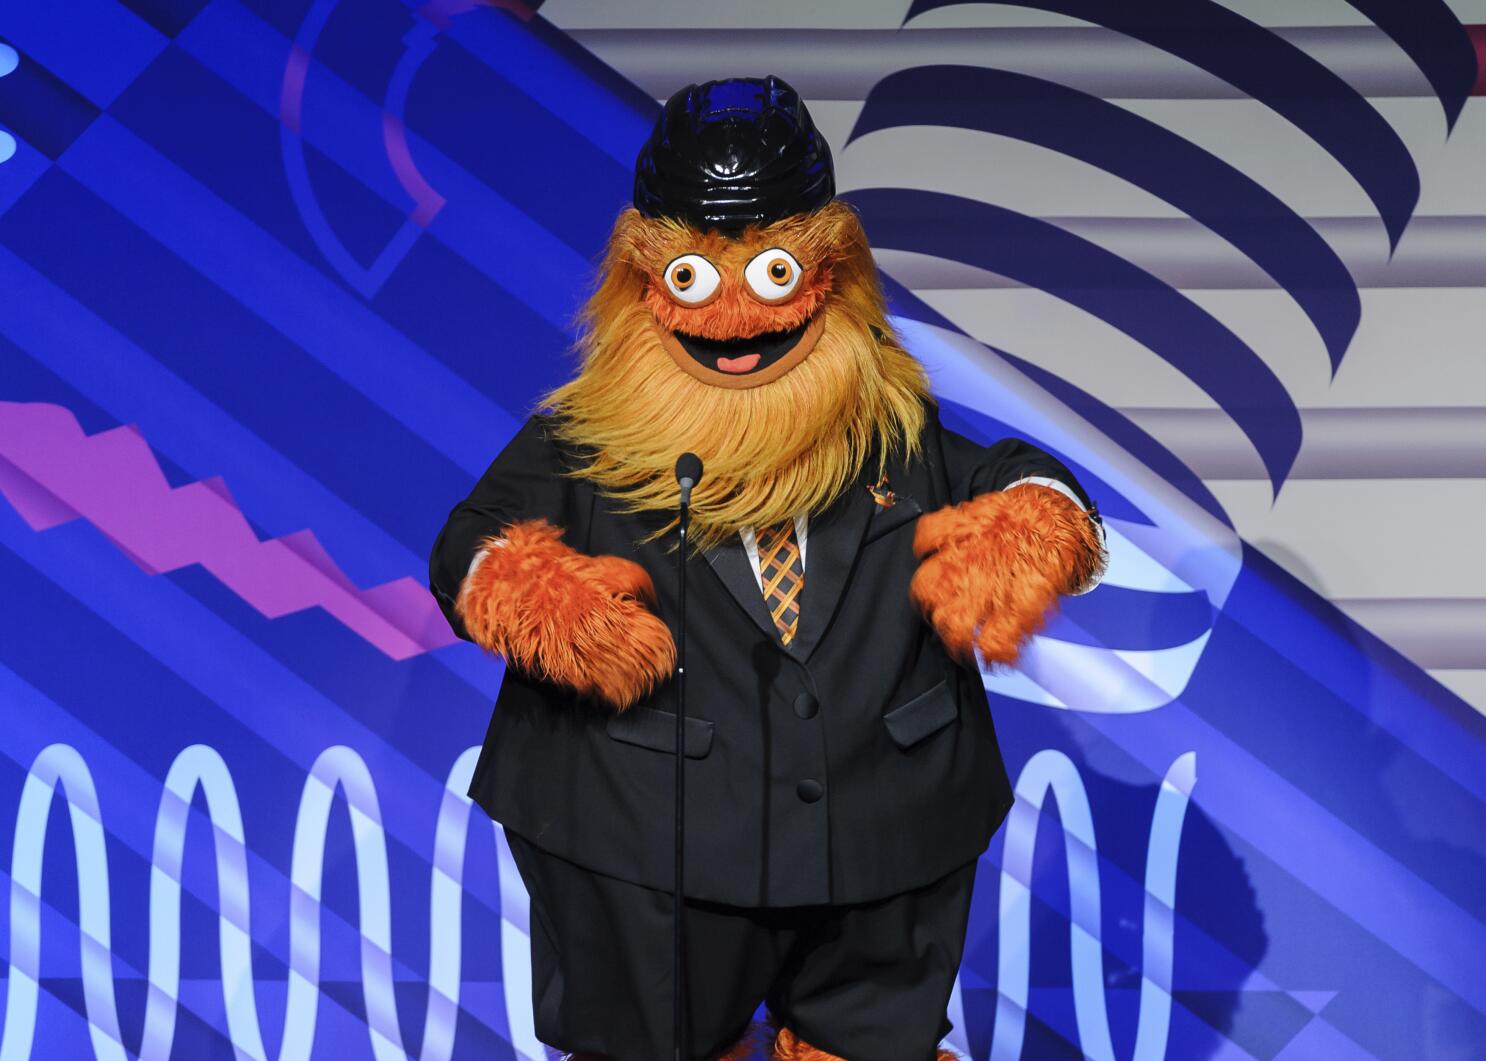 Philadelphia Flyers' mascot Gritty cleared in police investigation